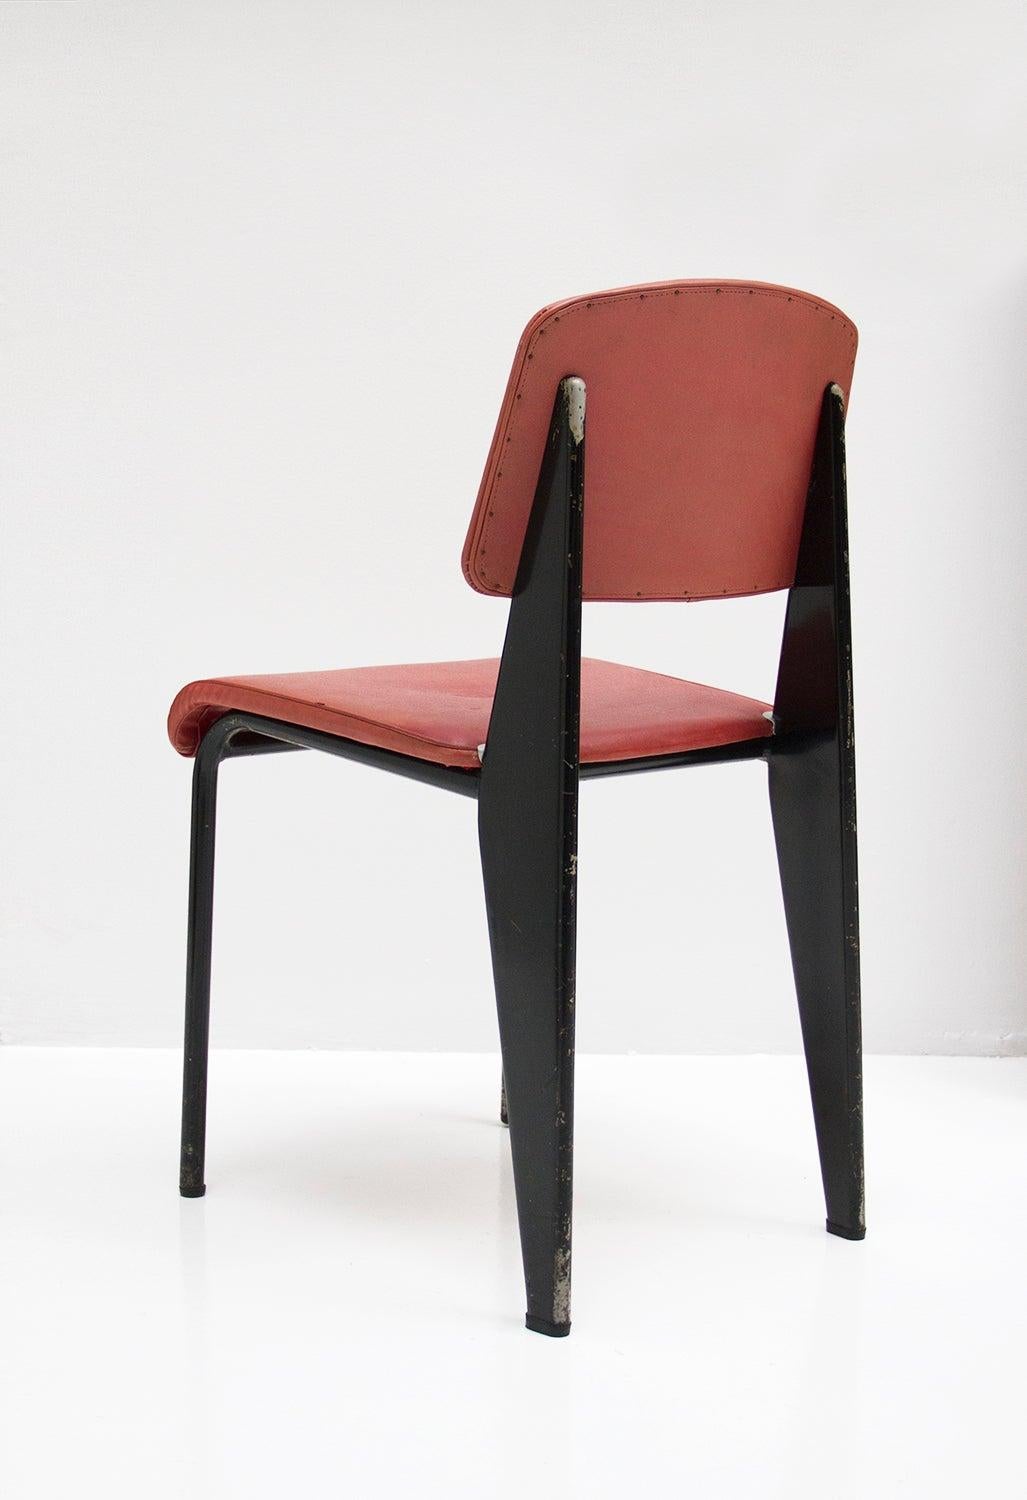 Mid-Century Modern Standard Chair Designed by Jean Prouve, circa 1950, France, Red, Original For Sale